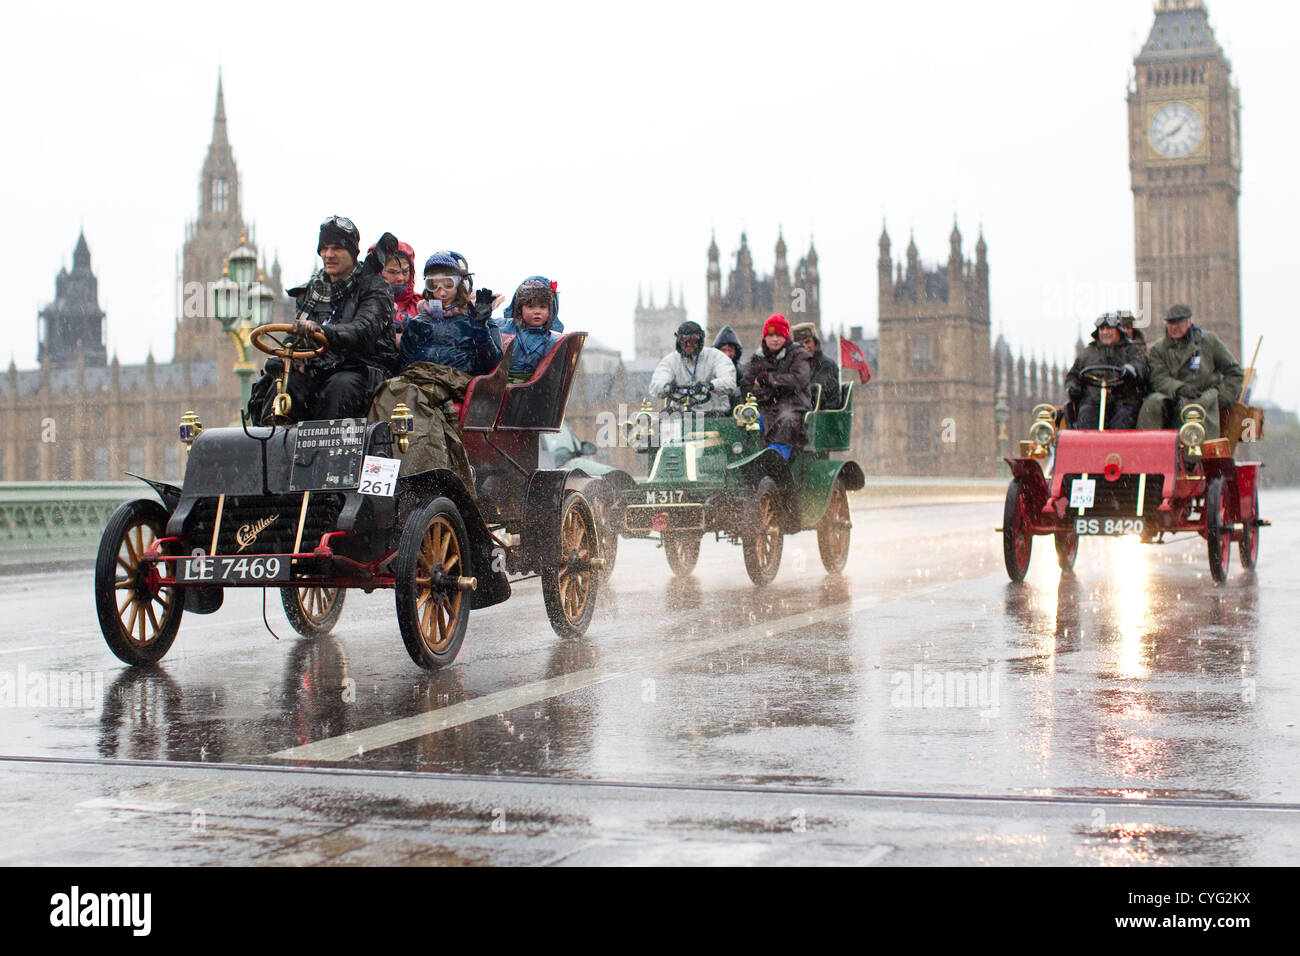 Royal Automobile Club's annual Veteran Car Run London to Brighton. 04.11.2012 Picture shows No.261 a 1903 Cadillac driven in wet conditions by Martin Ashby crossing Westminster Bridge, one of many classic vehicles taking part in this years London to Brighton Veteran Car Run 2012 starting at Hyde Park in Central London and finishing at the seafront on the Sussex resort of Brighton. Stock Photo